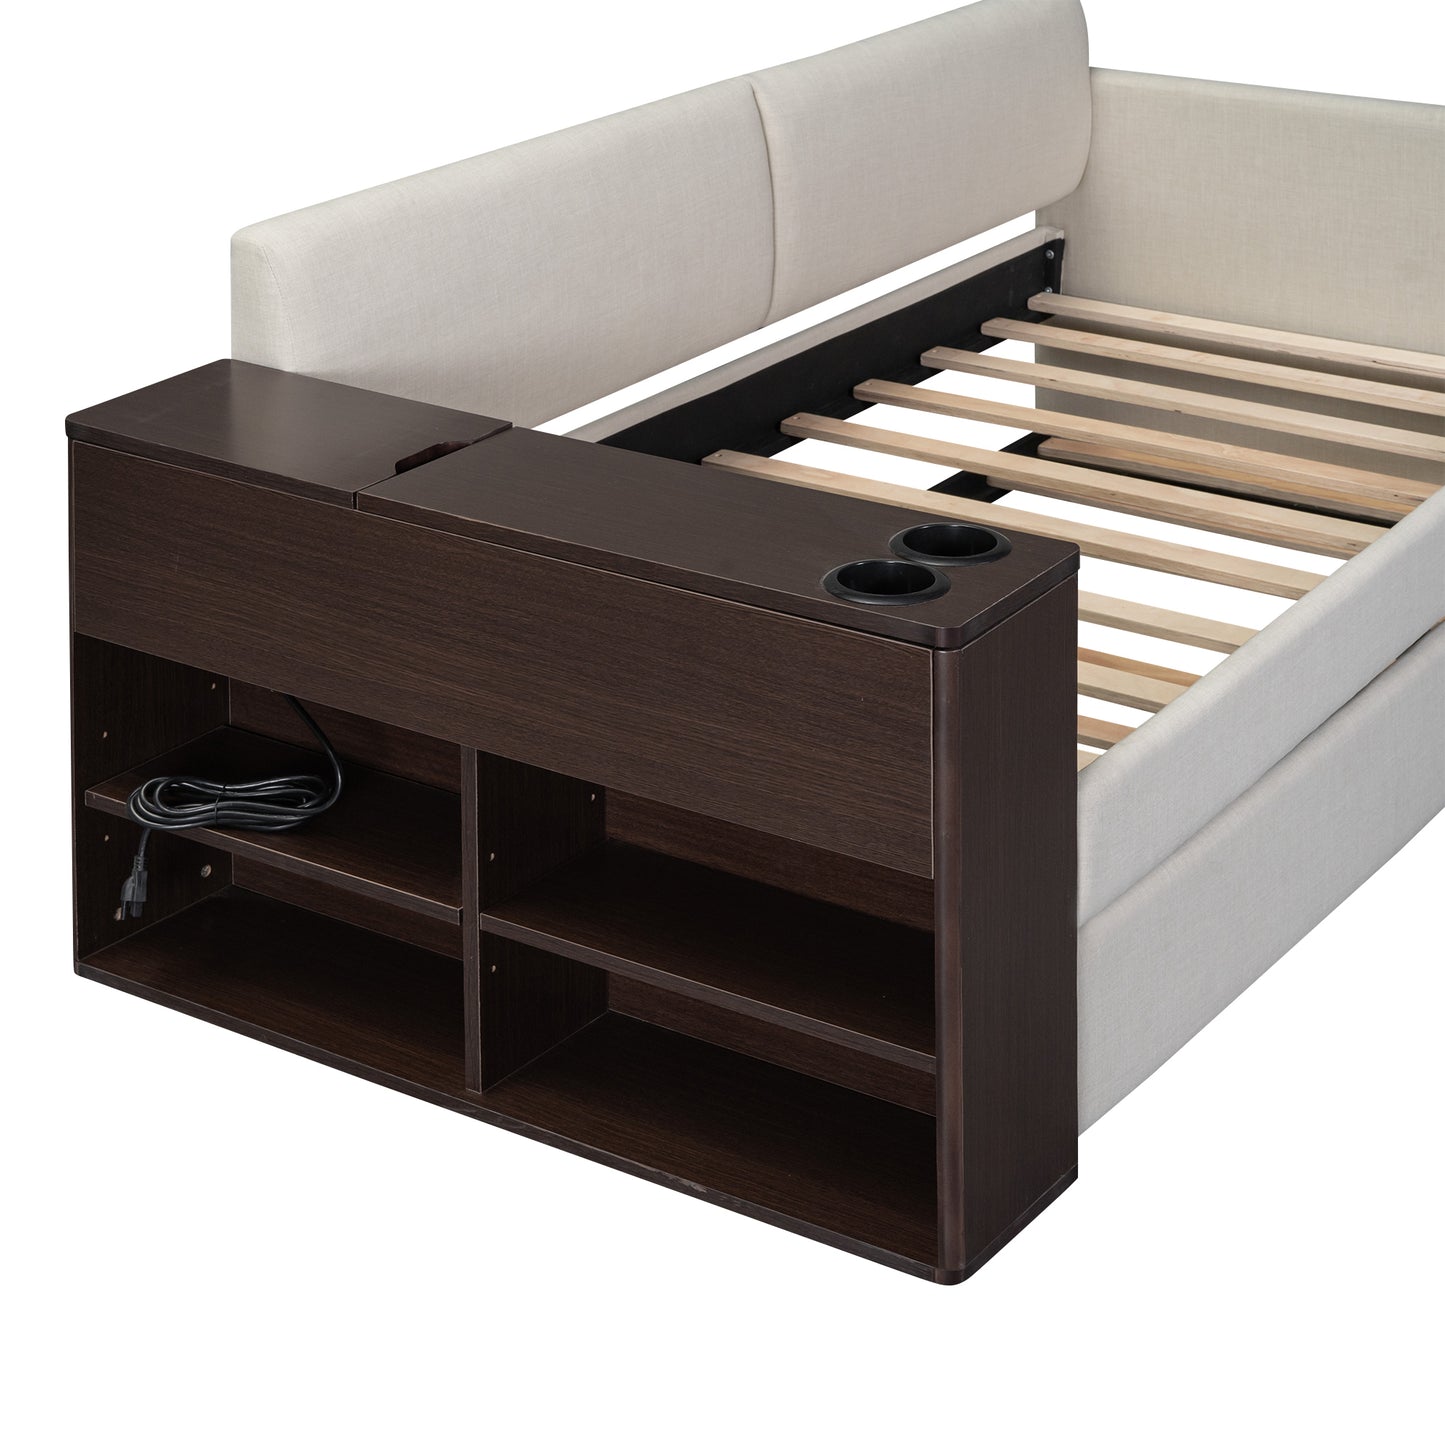 Twin Size Upholstery Daybed with Storage Arm, Trundle, Cup Holder and USB Design, Beige